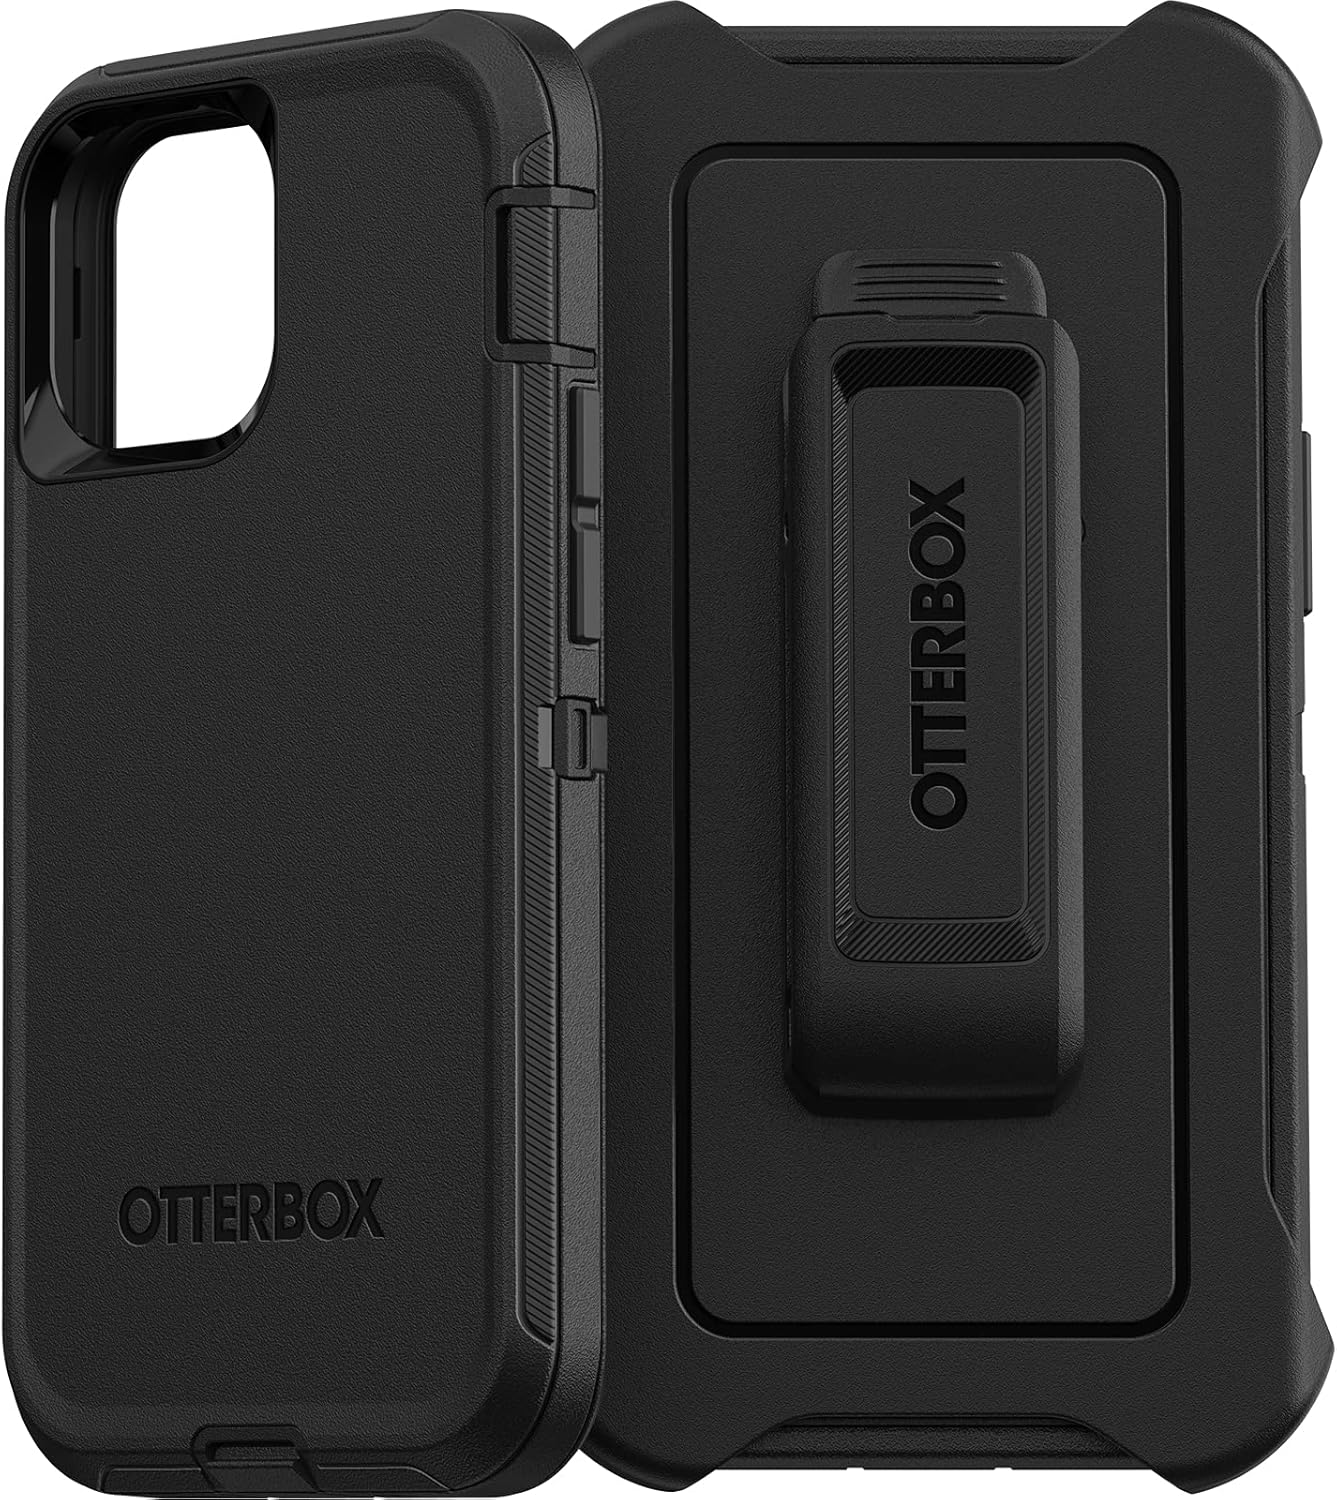 OtterBox Defender Series SCREENLESS Edition Case for iPhone 13 Mini